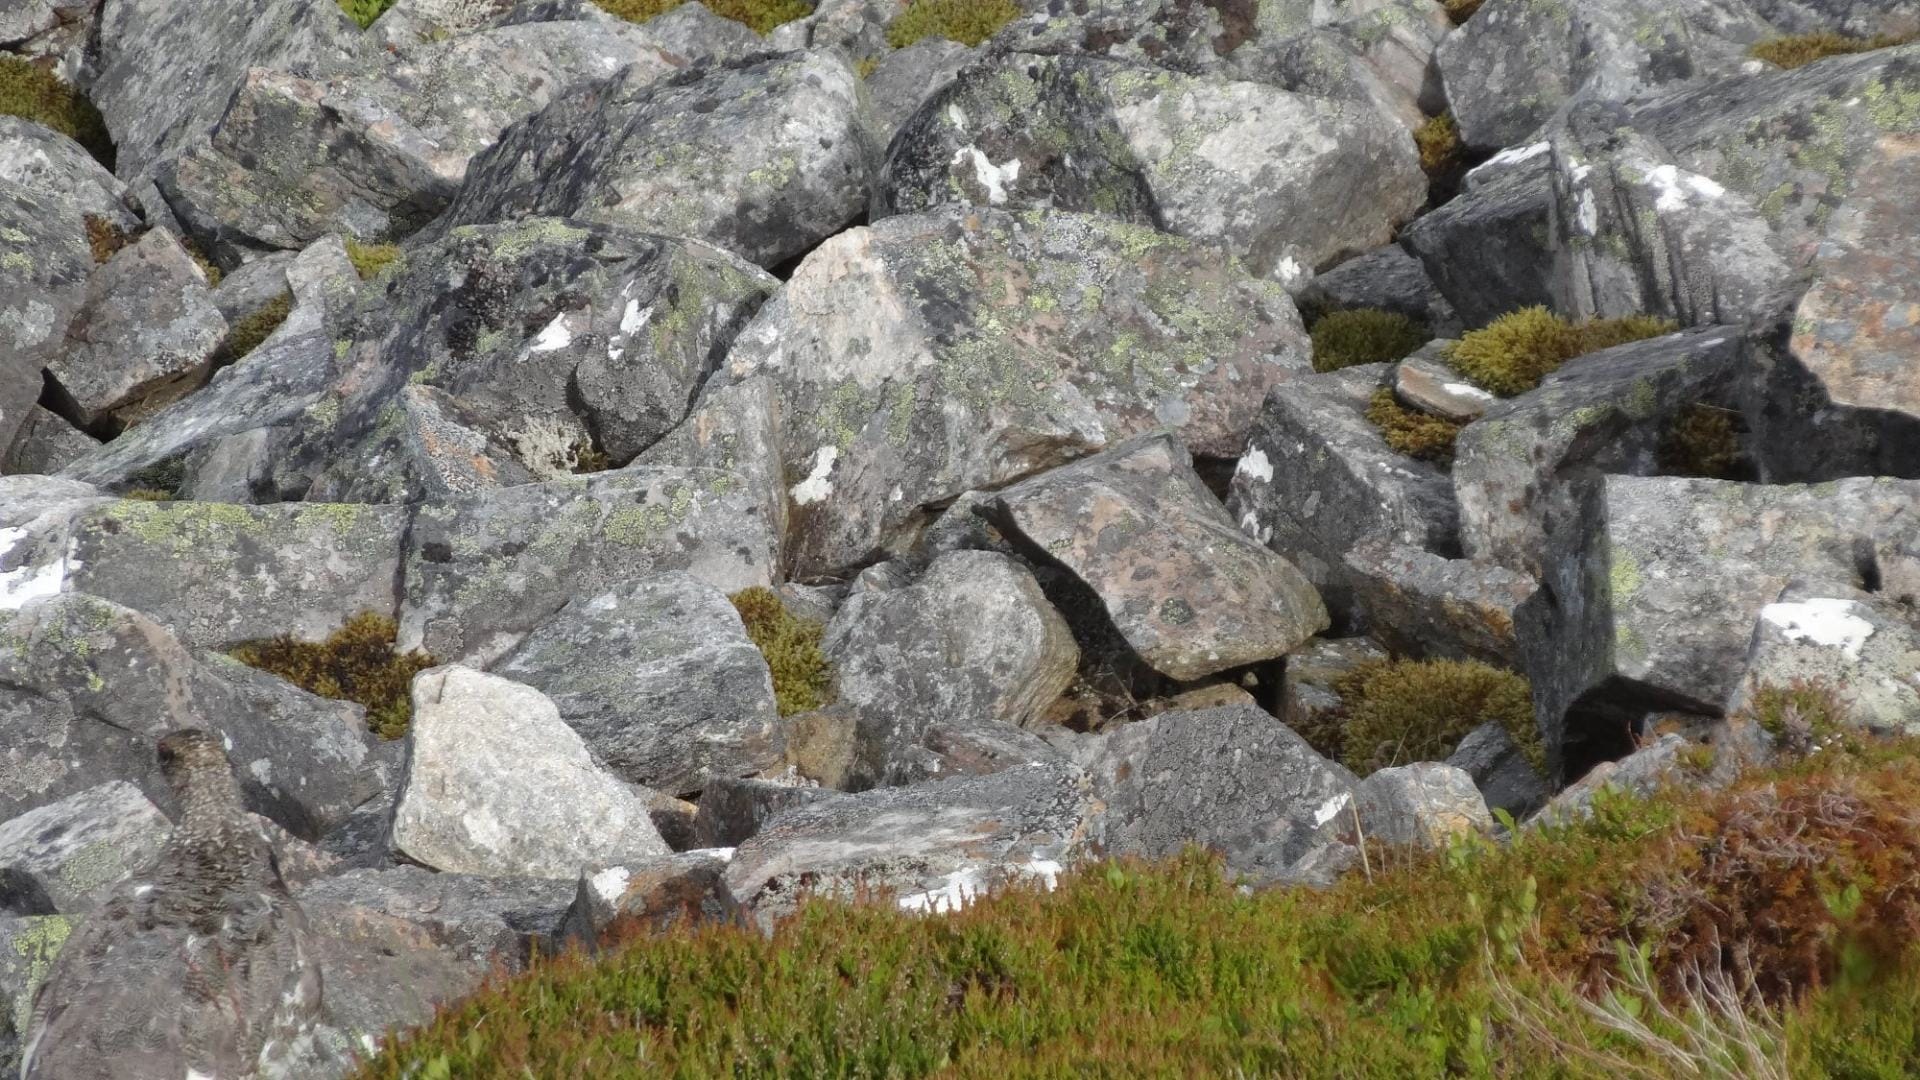 You have good observation skills if you can spot a small bird hiding among the rocks in just 10 seconds.